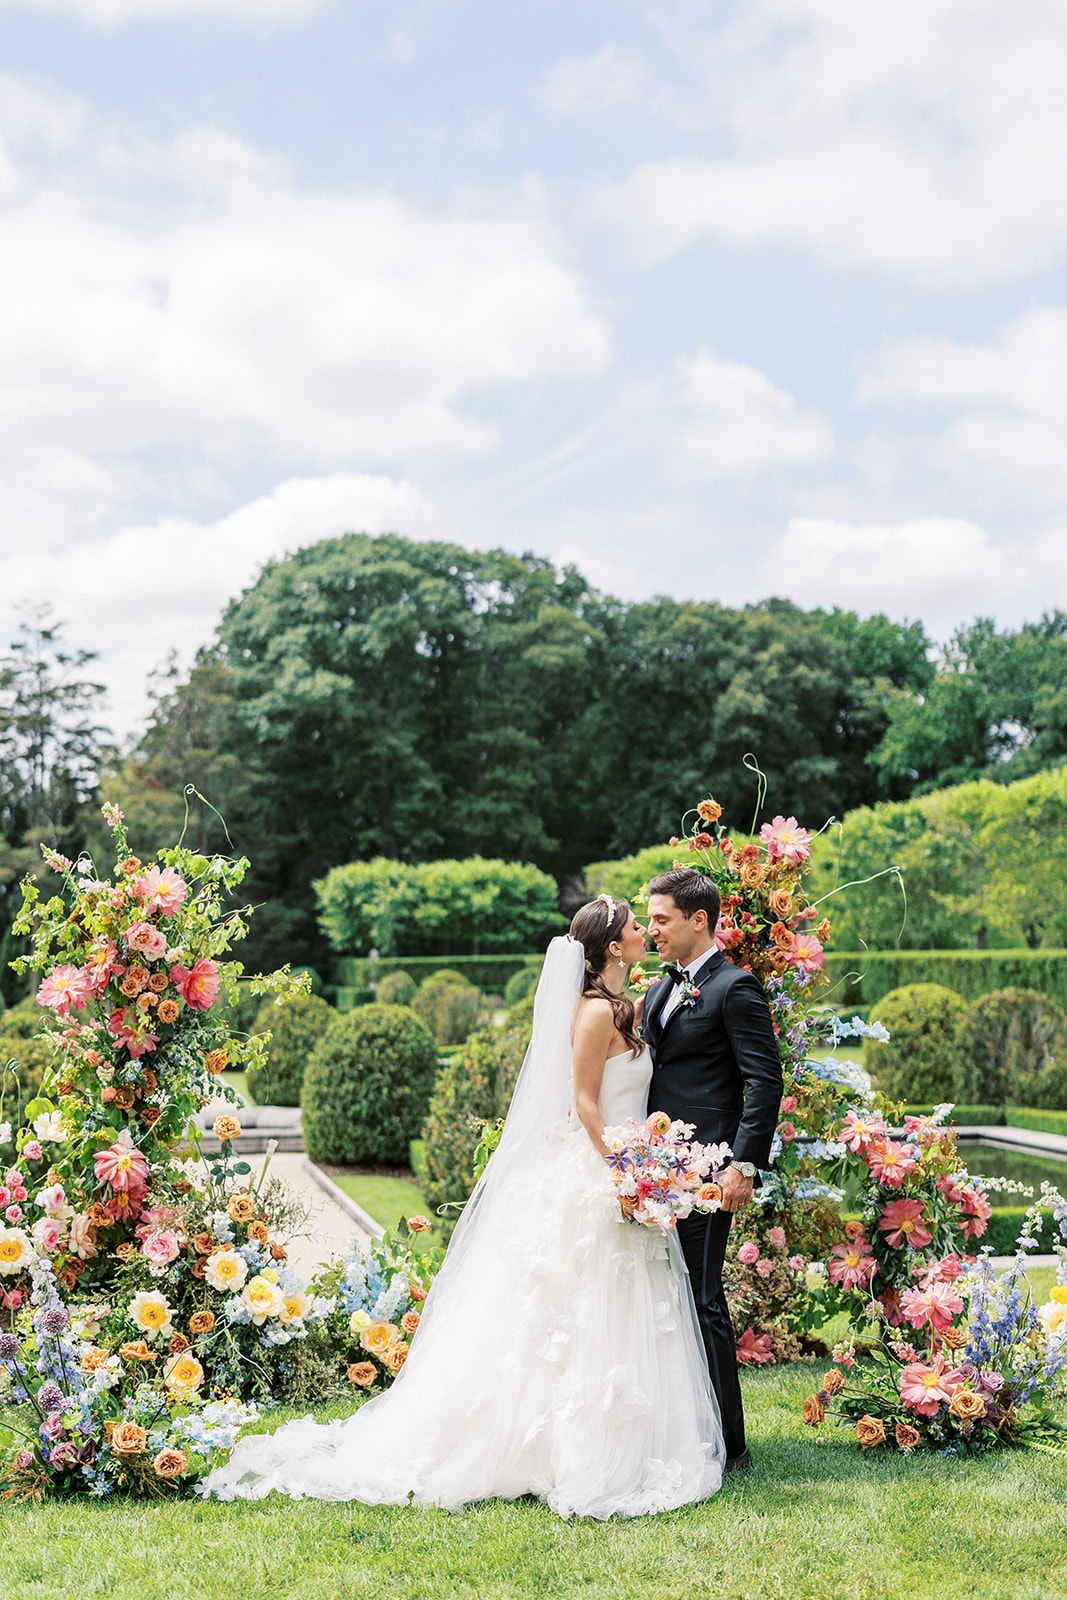 Newlyweds lean in for a kiss while standing in a colorful garden at the Oheka Castle